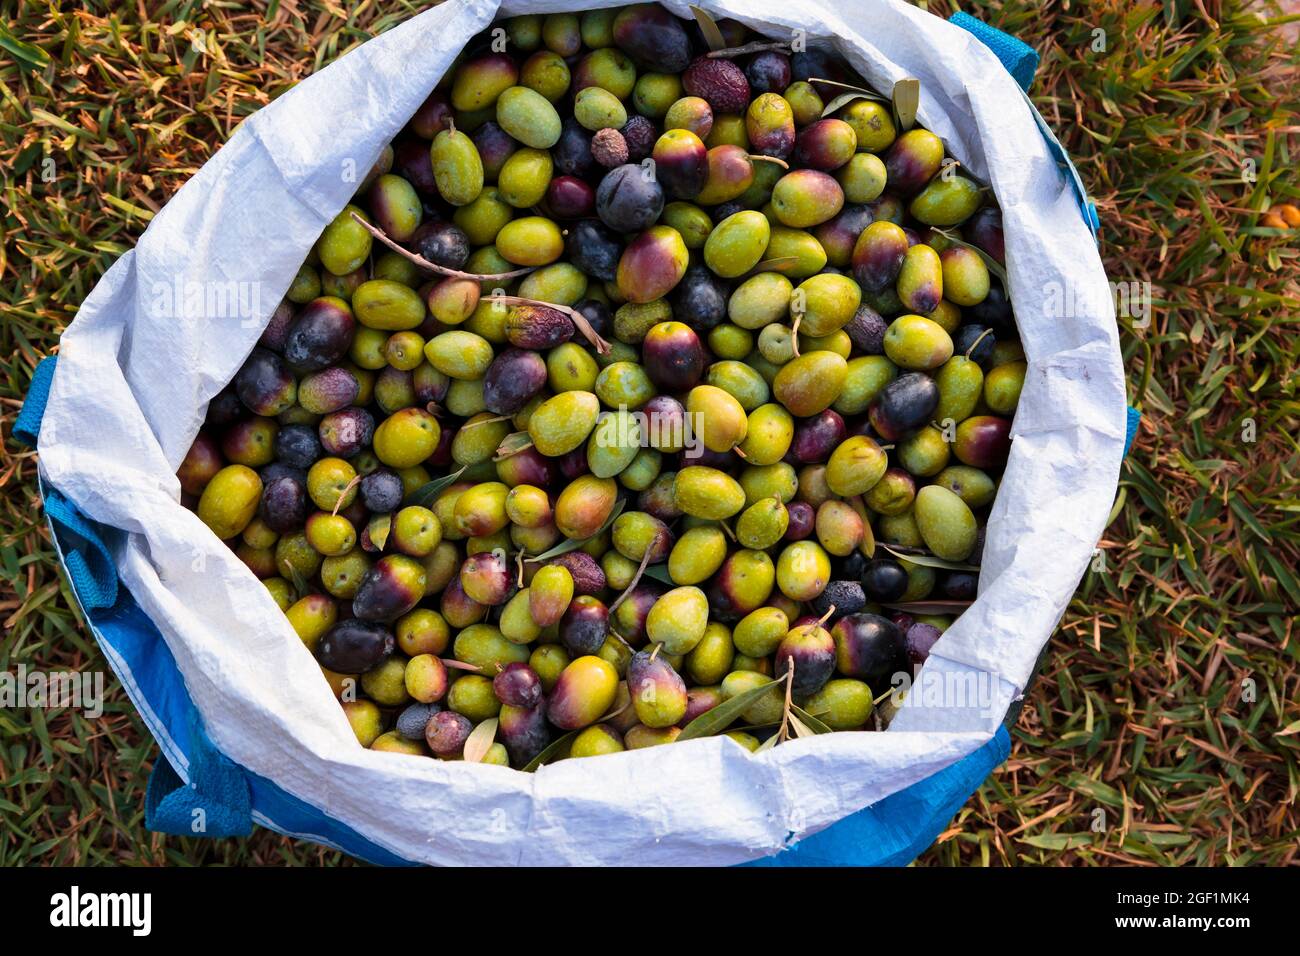 Top down view of a sack full of organic olives Stock Photo